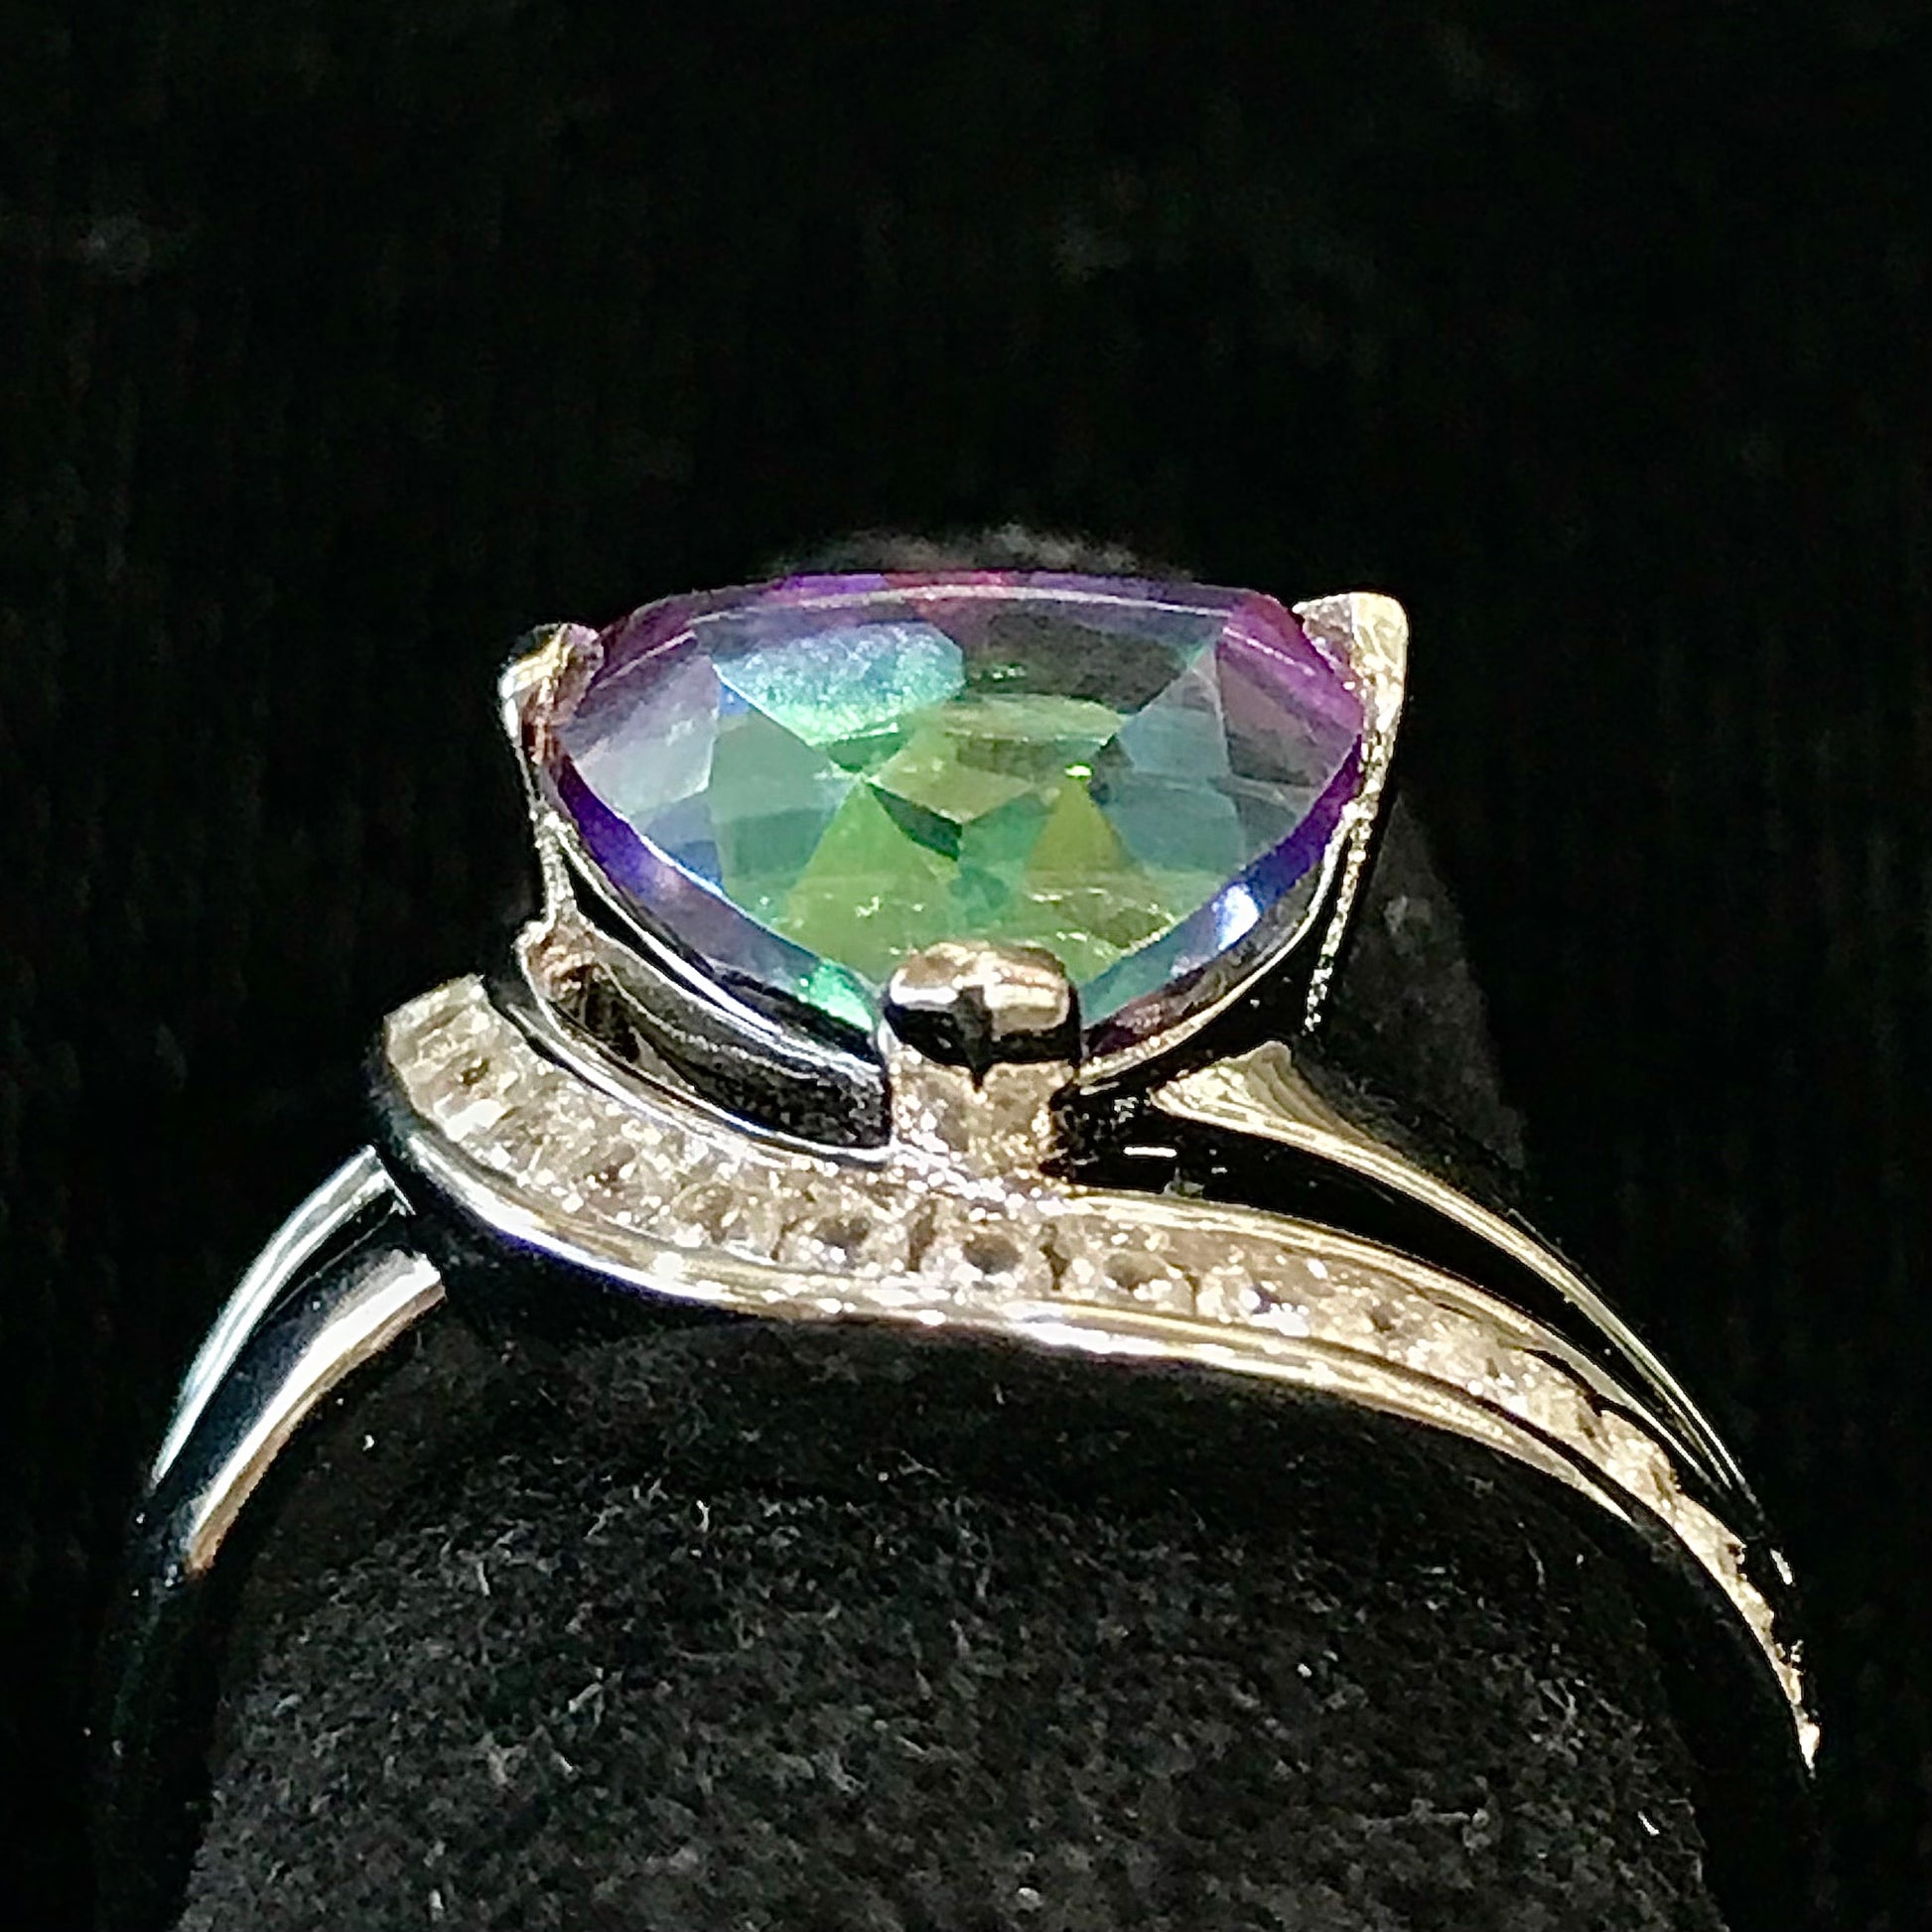 Mystic topaz ring with cubic zirconia side stones set in sterling silver with a double band design.